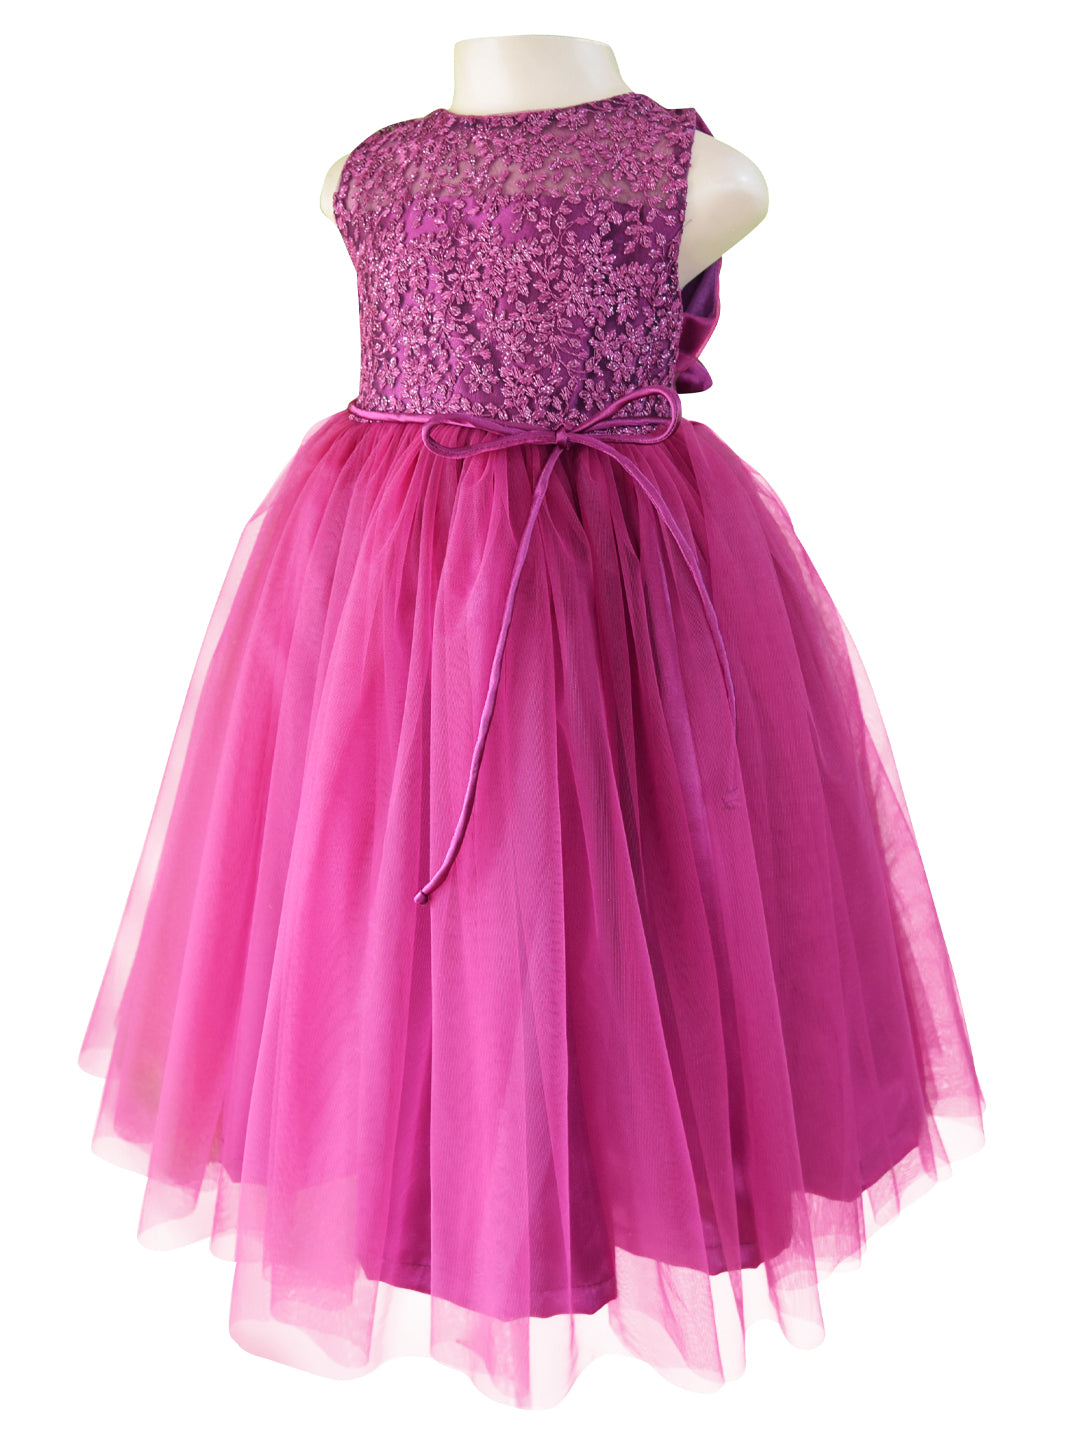 Party Wear Gown For Baby In Orchid Birthday Dress For Girls Online   jhakhascom